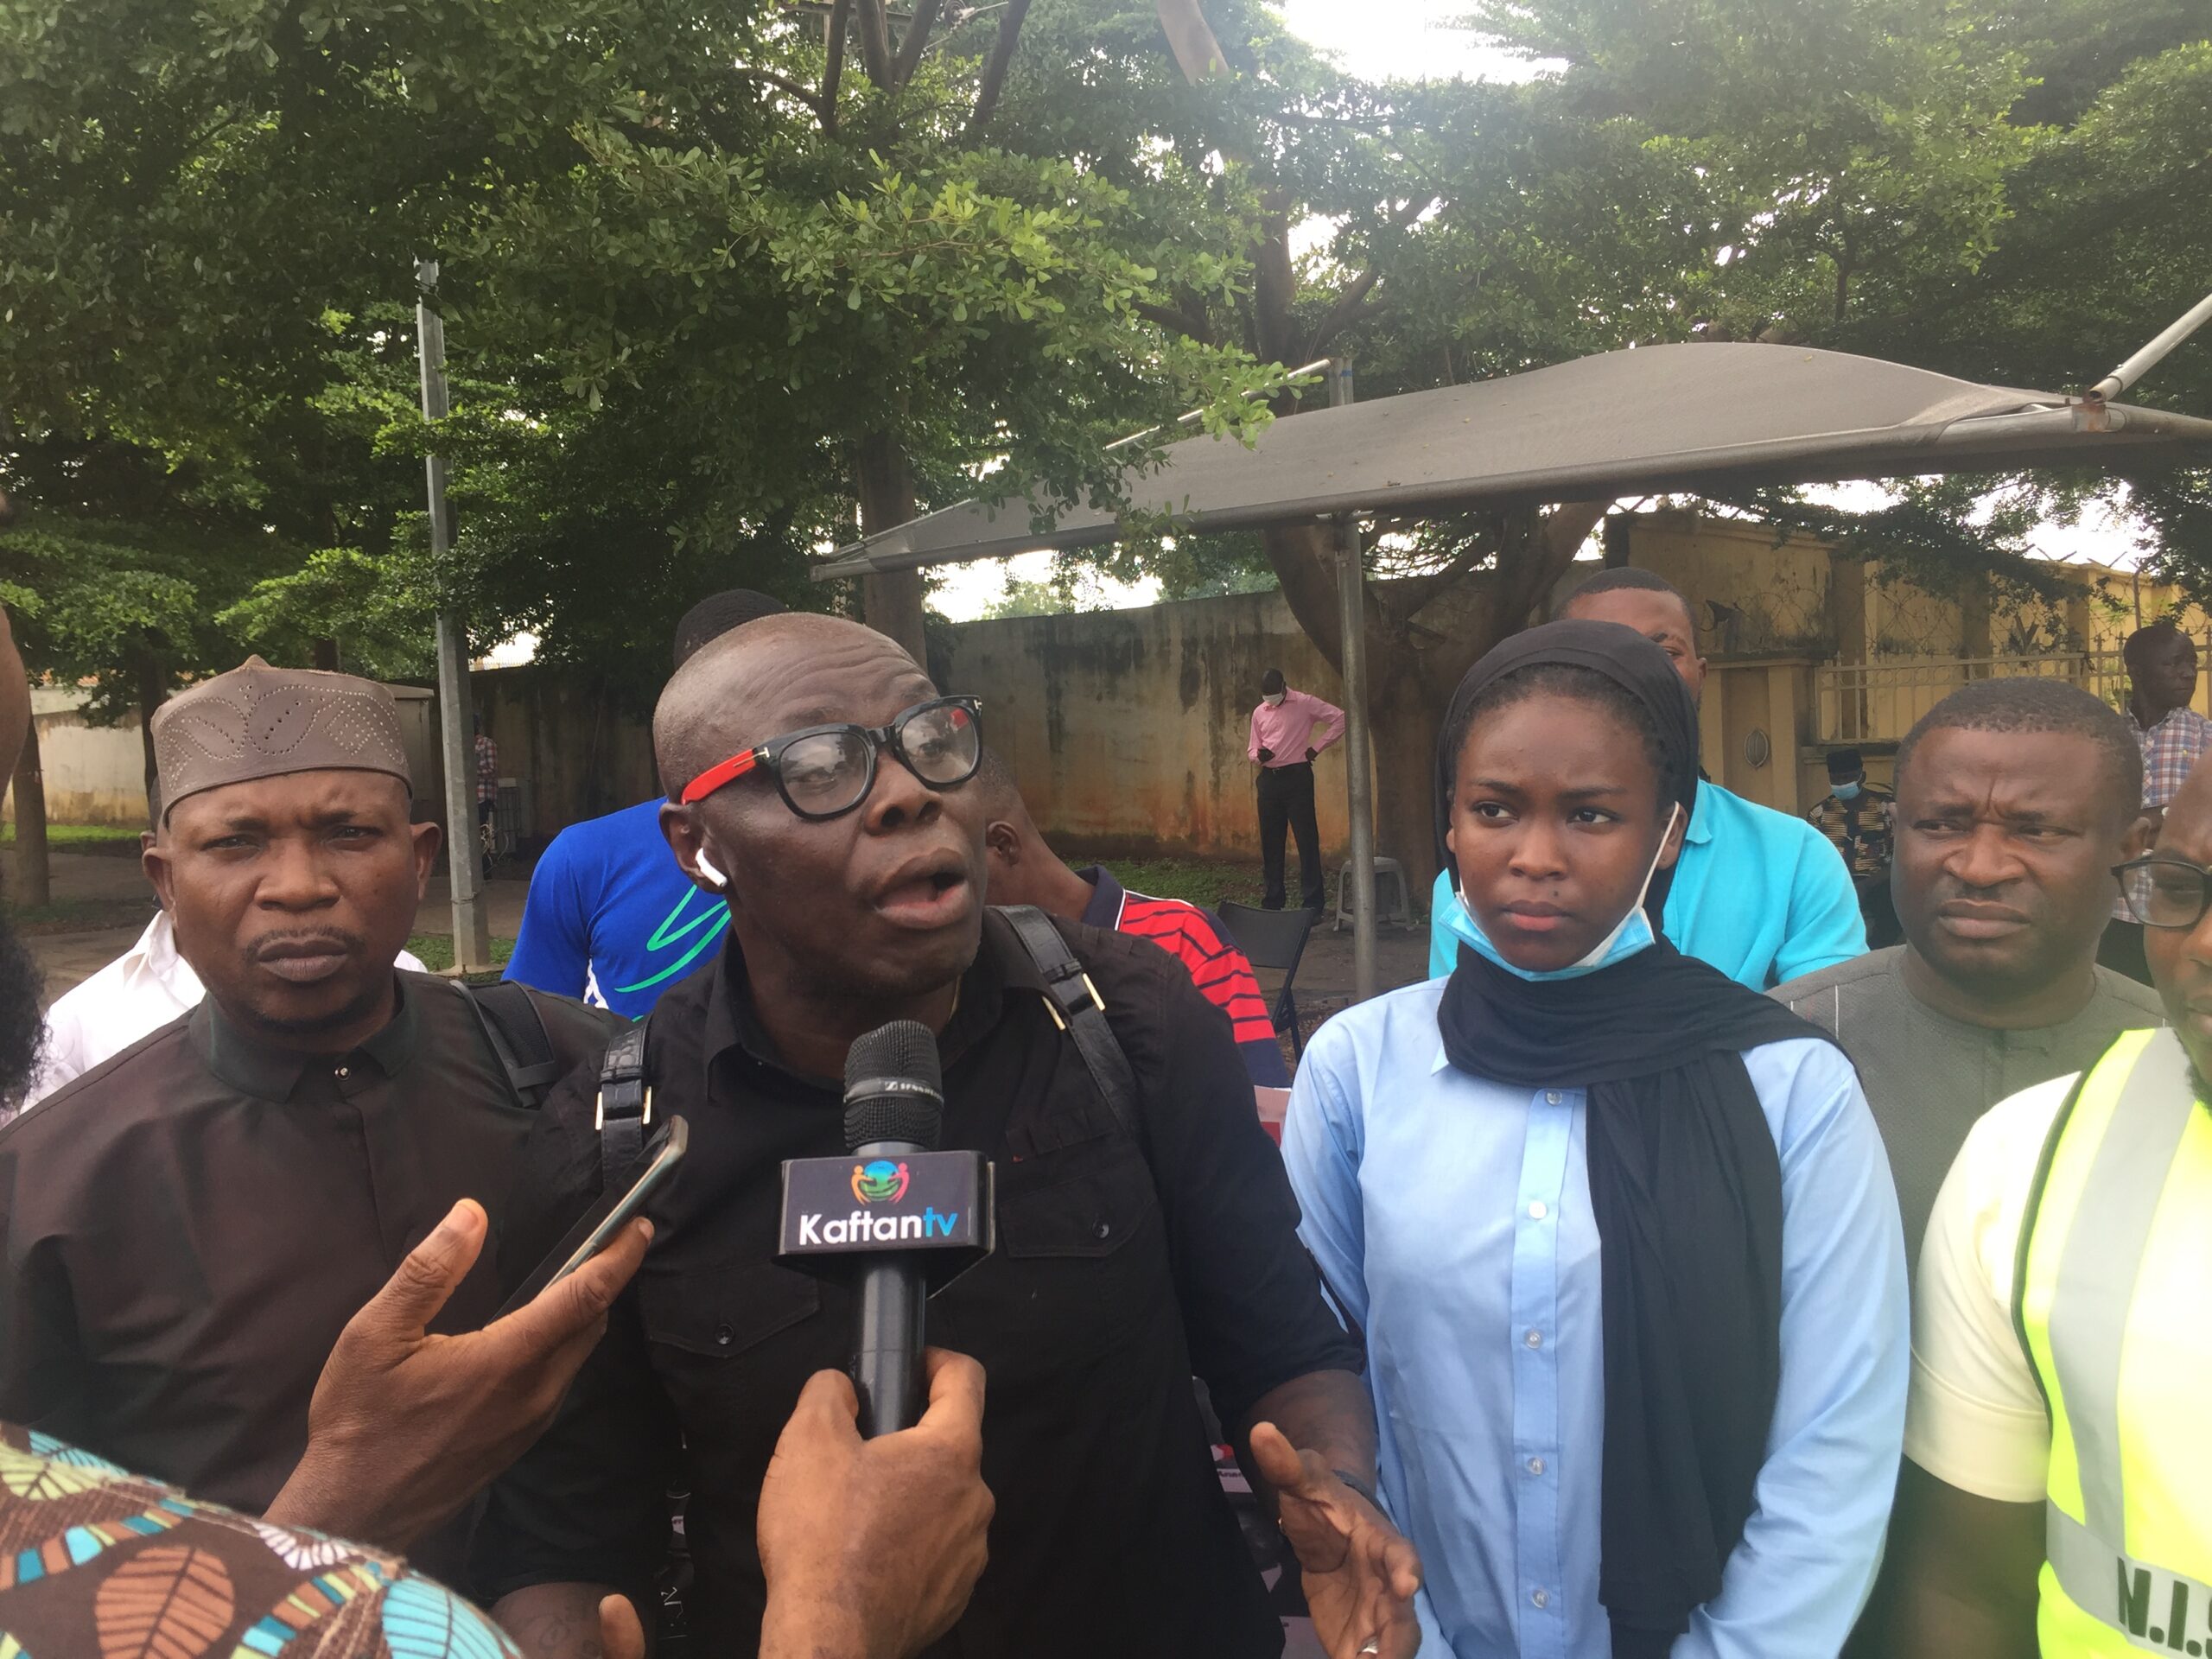 EndSARS Protest: Eholor berates Wike, Atiku, Osinbajo, urges youths to sustain momentum against oppressors